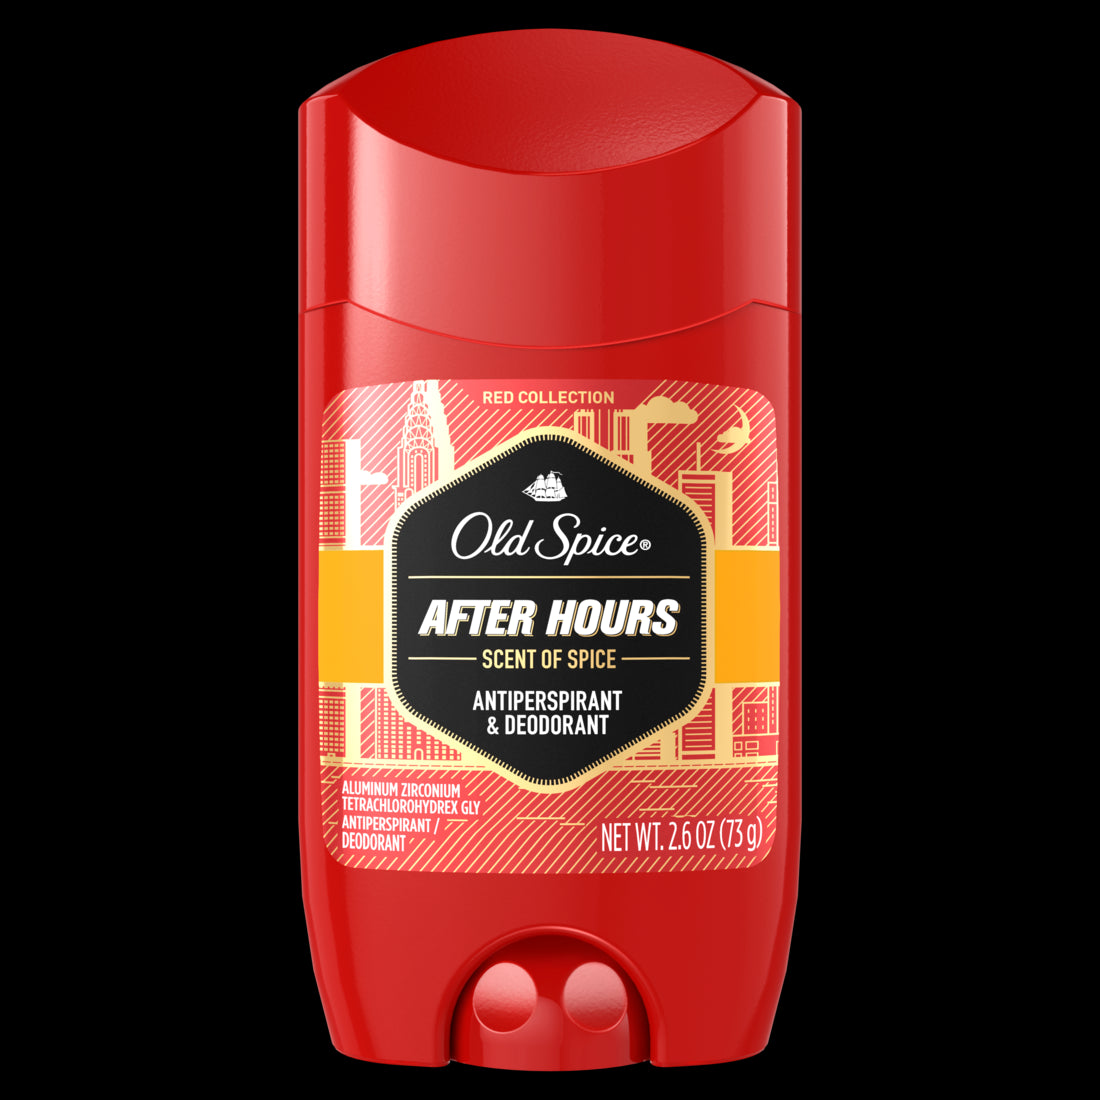 Old Spice Red Collection Anti-Perspirant Deodorant For Men After Hours Scent - 2.5oz/12pk